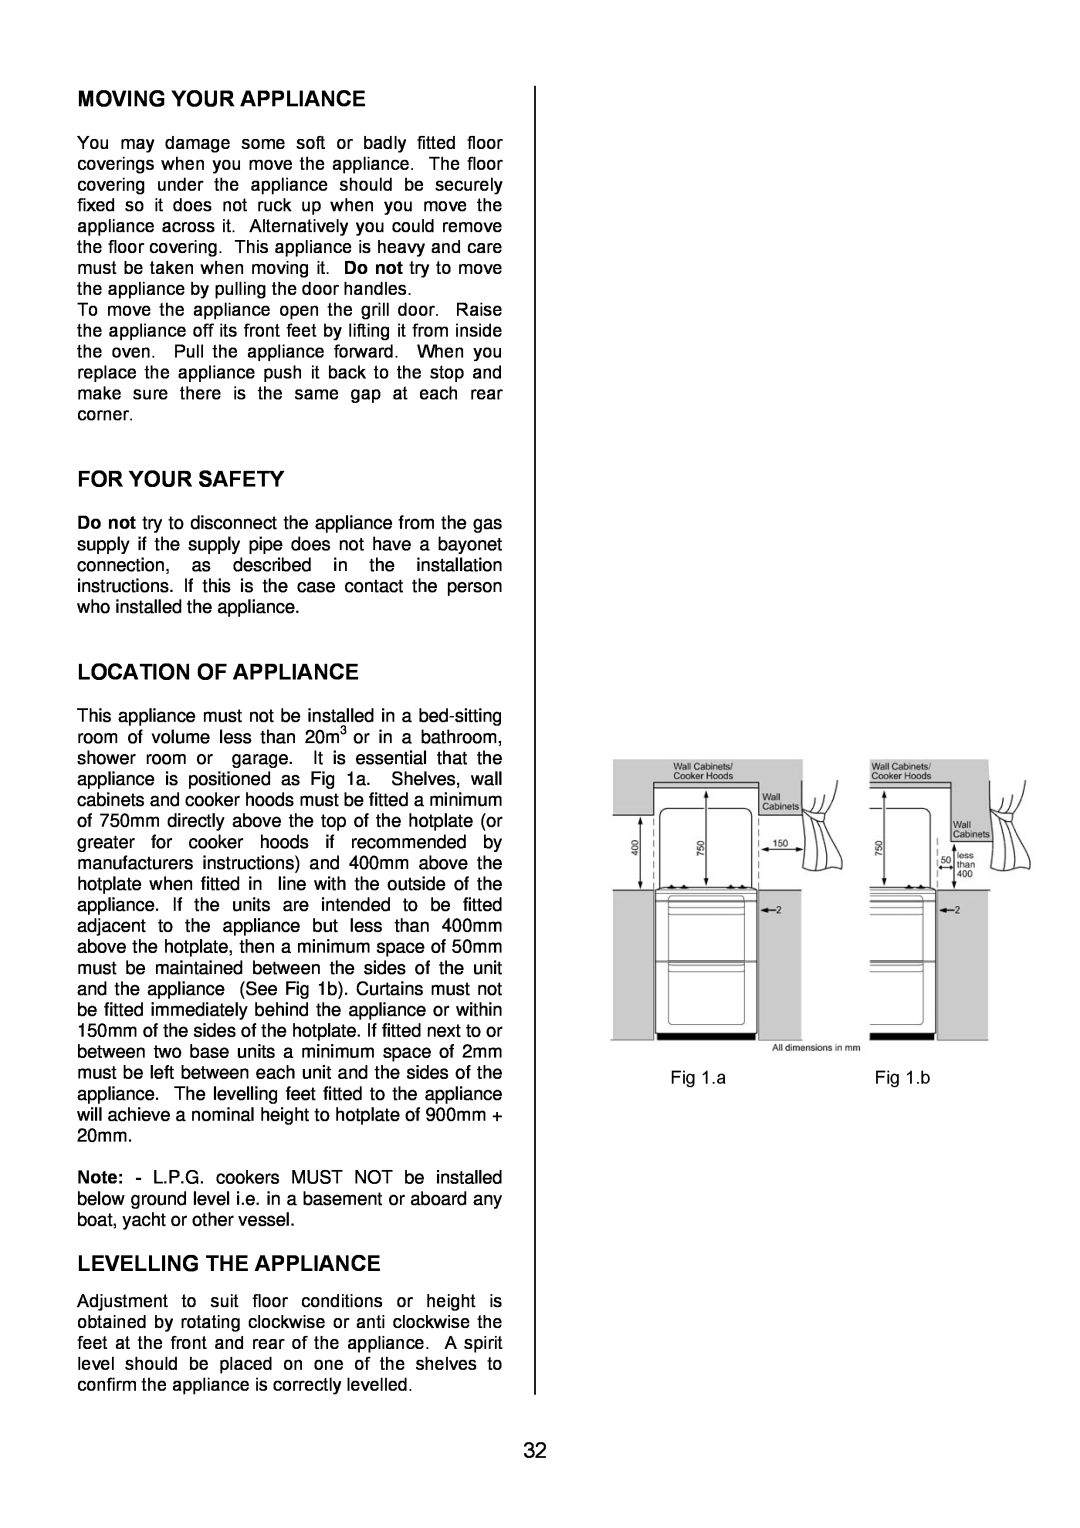 Electrolux EKG6046/EKG6047 manual Moving Your Appliance, For Your Safety, Location Of Appliance, Levelling The Appliance 